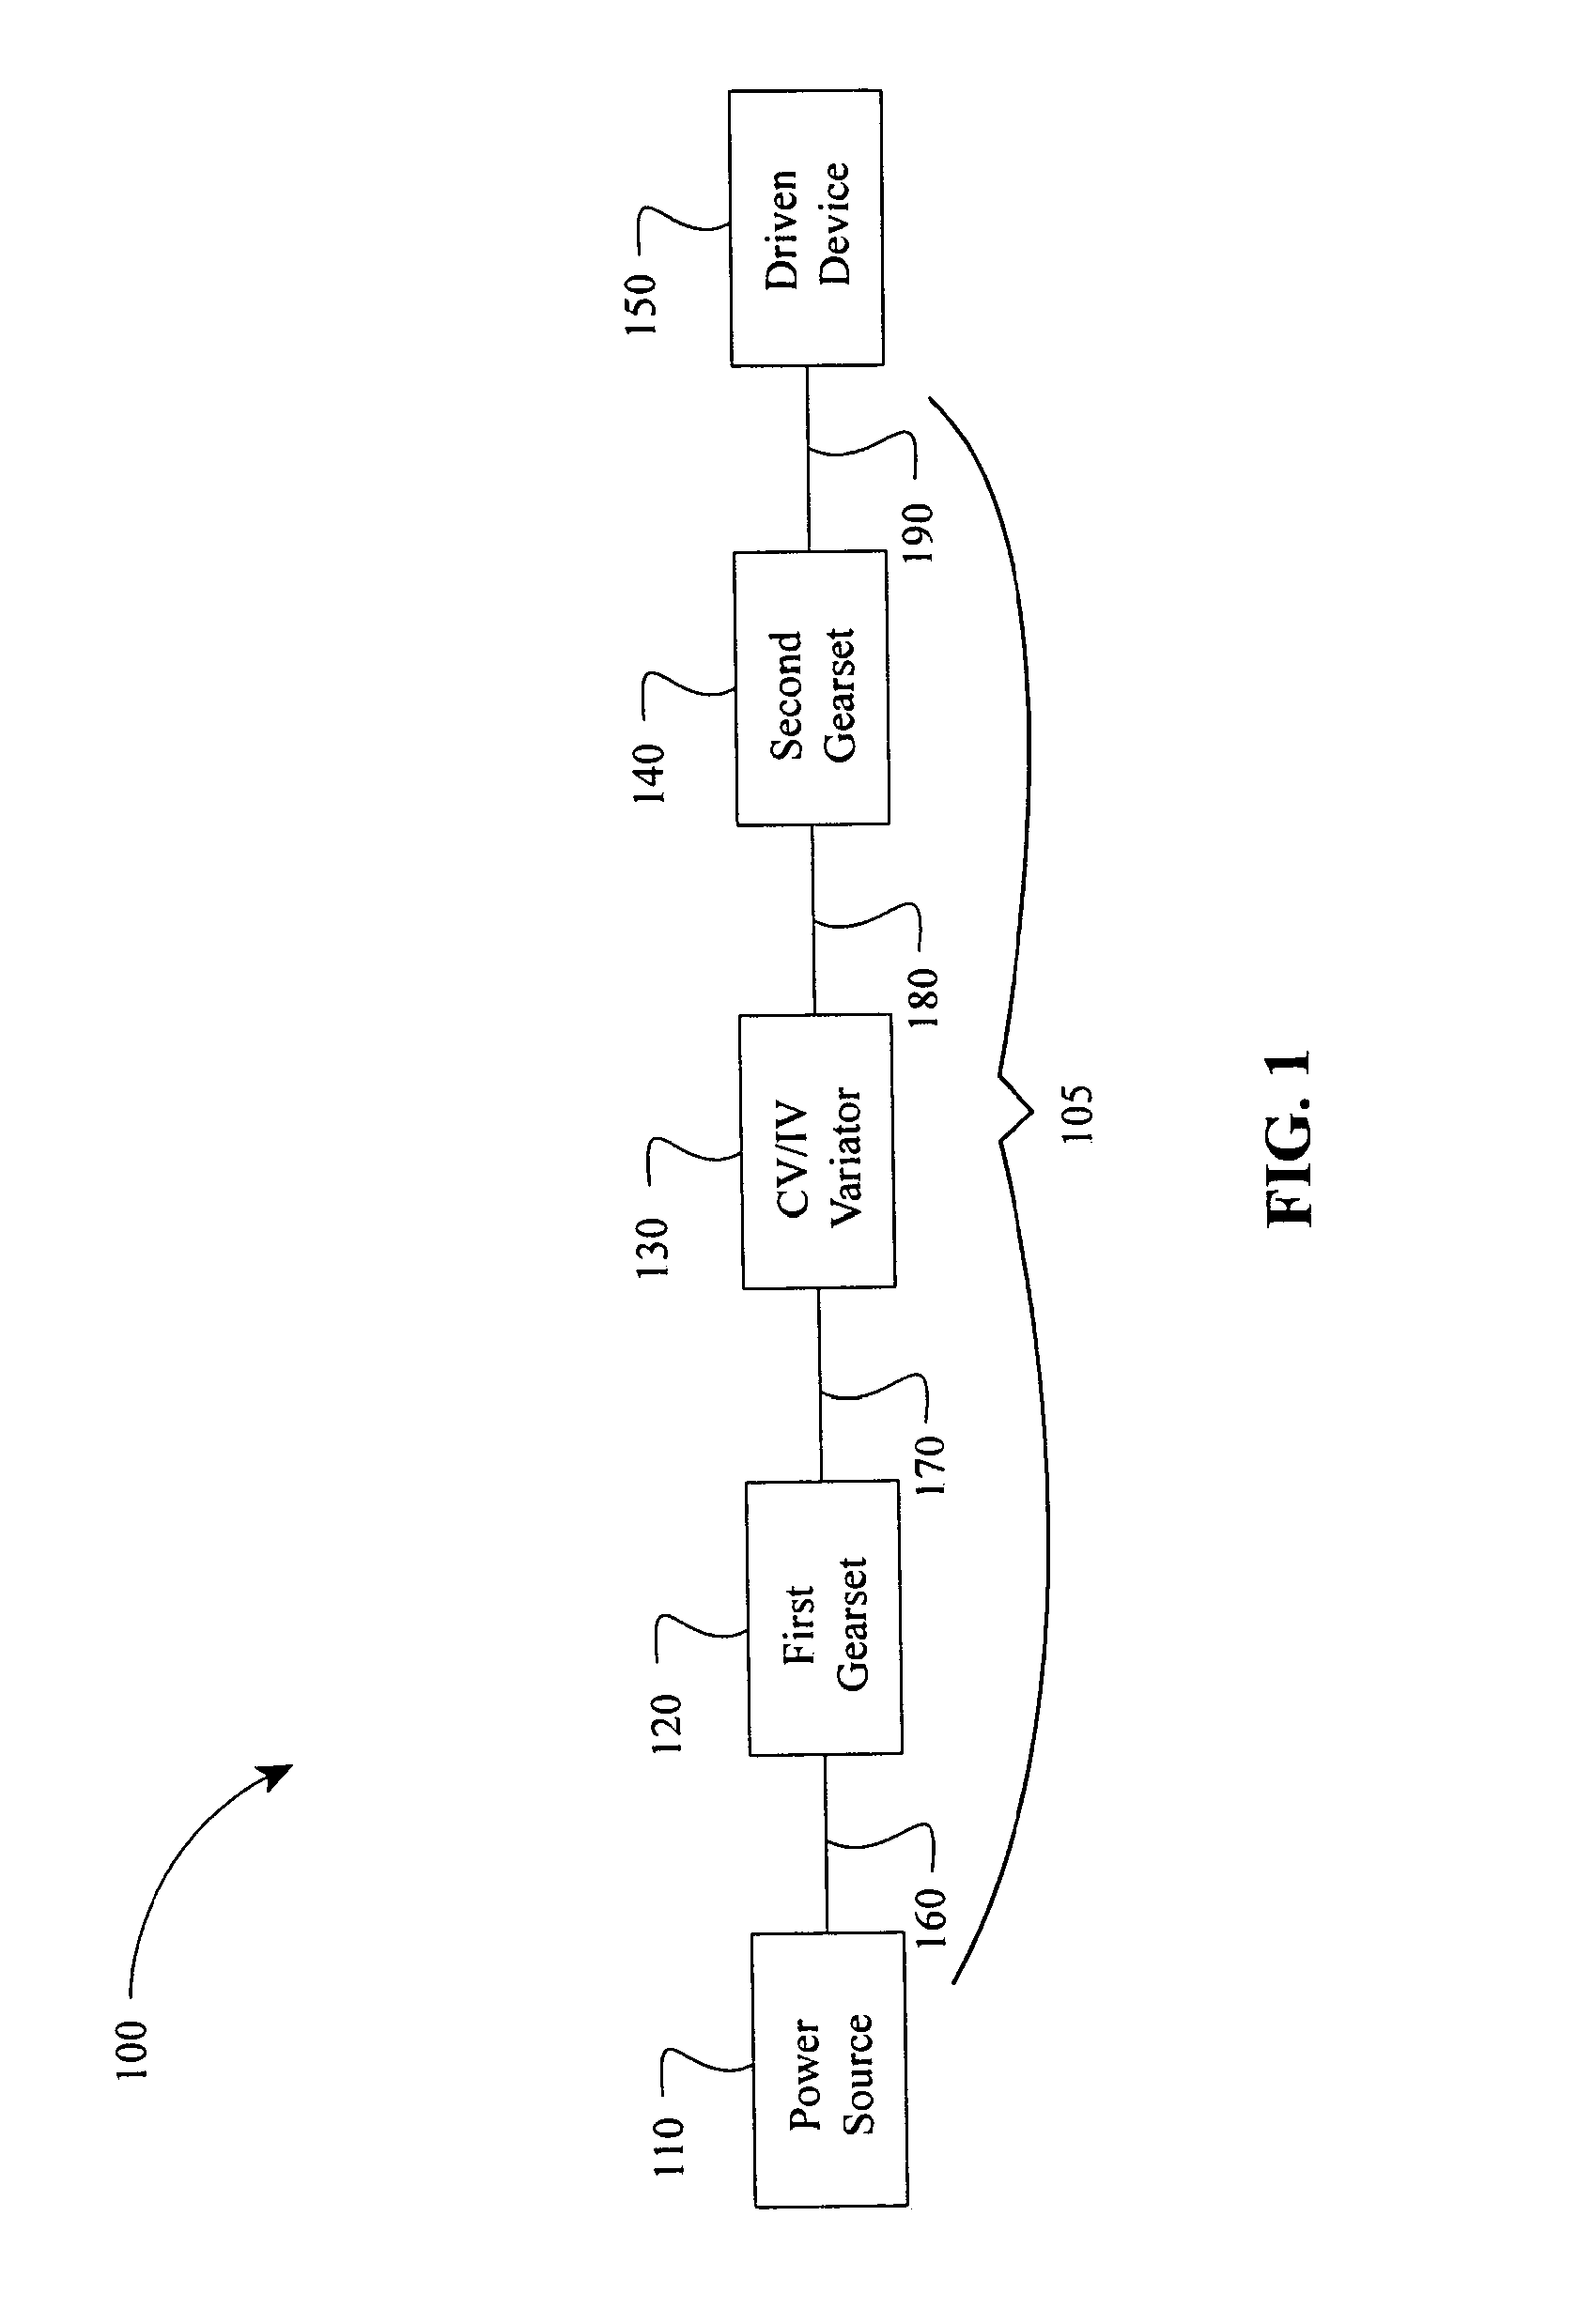 Infinitely variable transmissions, continuously variable transmissions, methods, assemblies, subassemblies, and components therefor